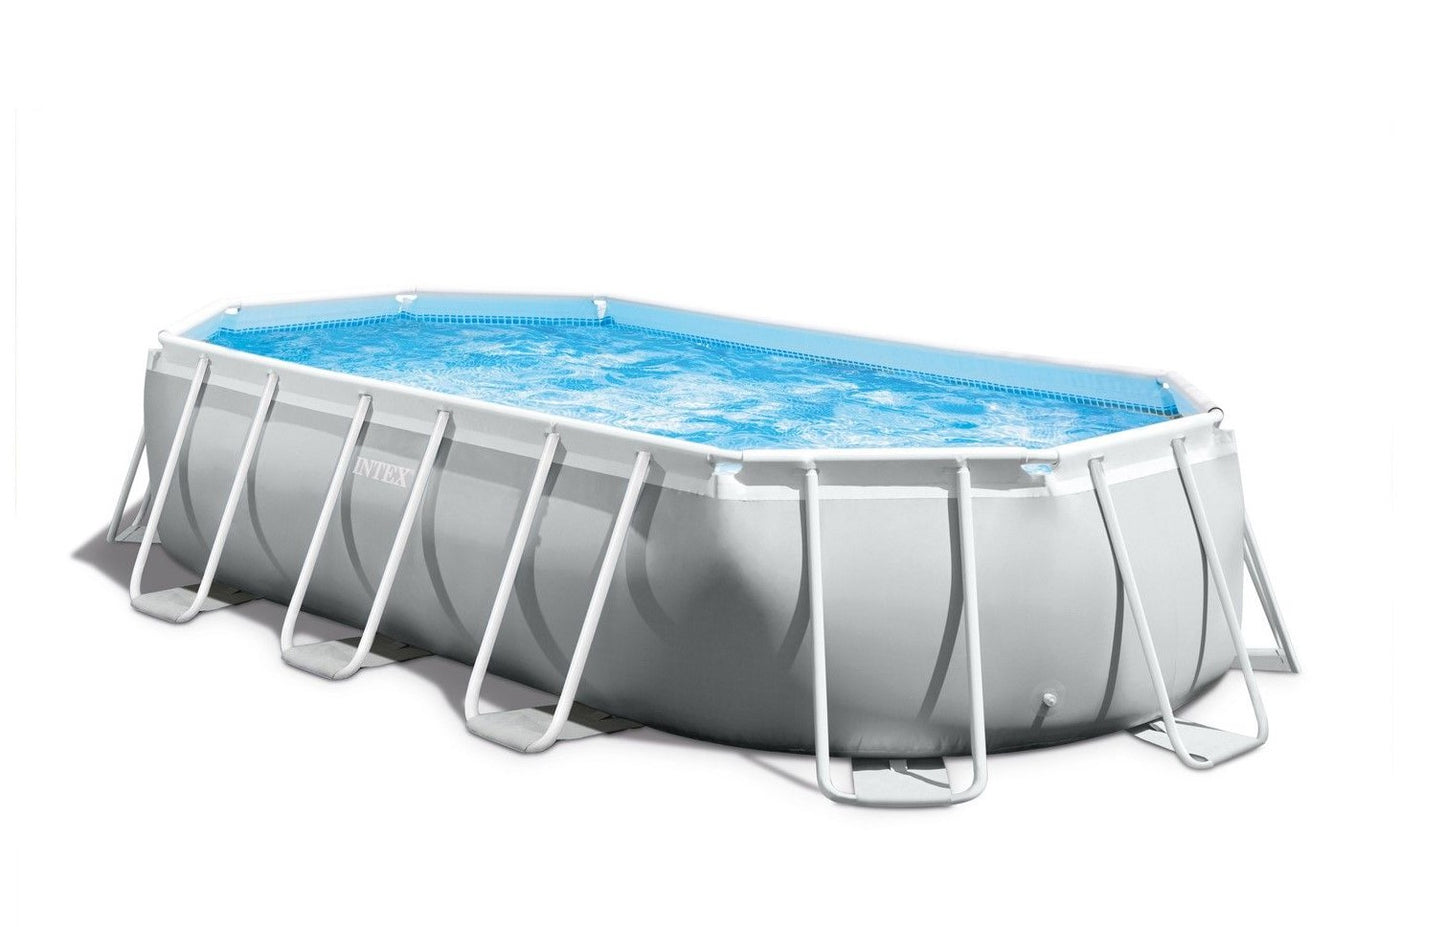 Intex Prism Frame Oval Pool 16'6" x 9' x 48 Inch Swimming Pool with Hydro Aeration Technology for Family and Kids Ages 6+ | 26796